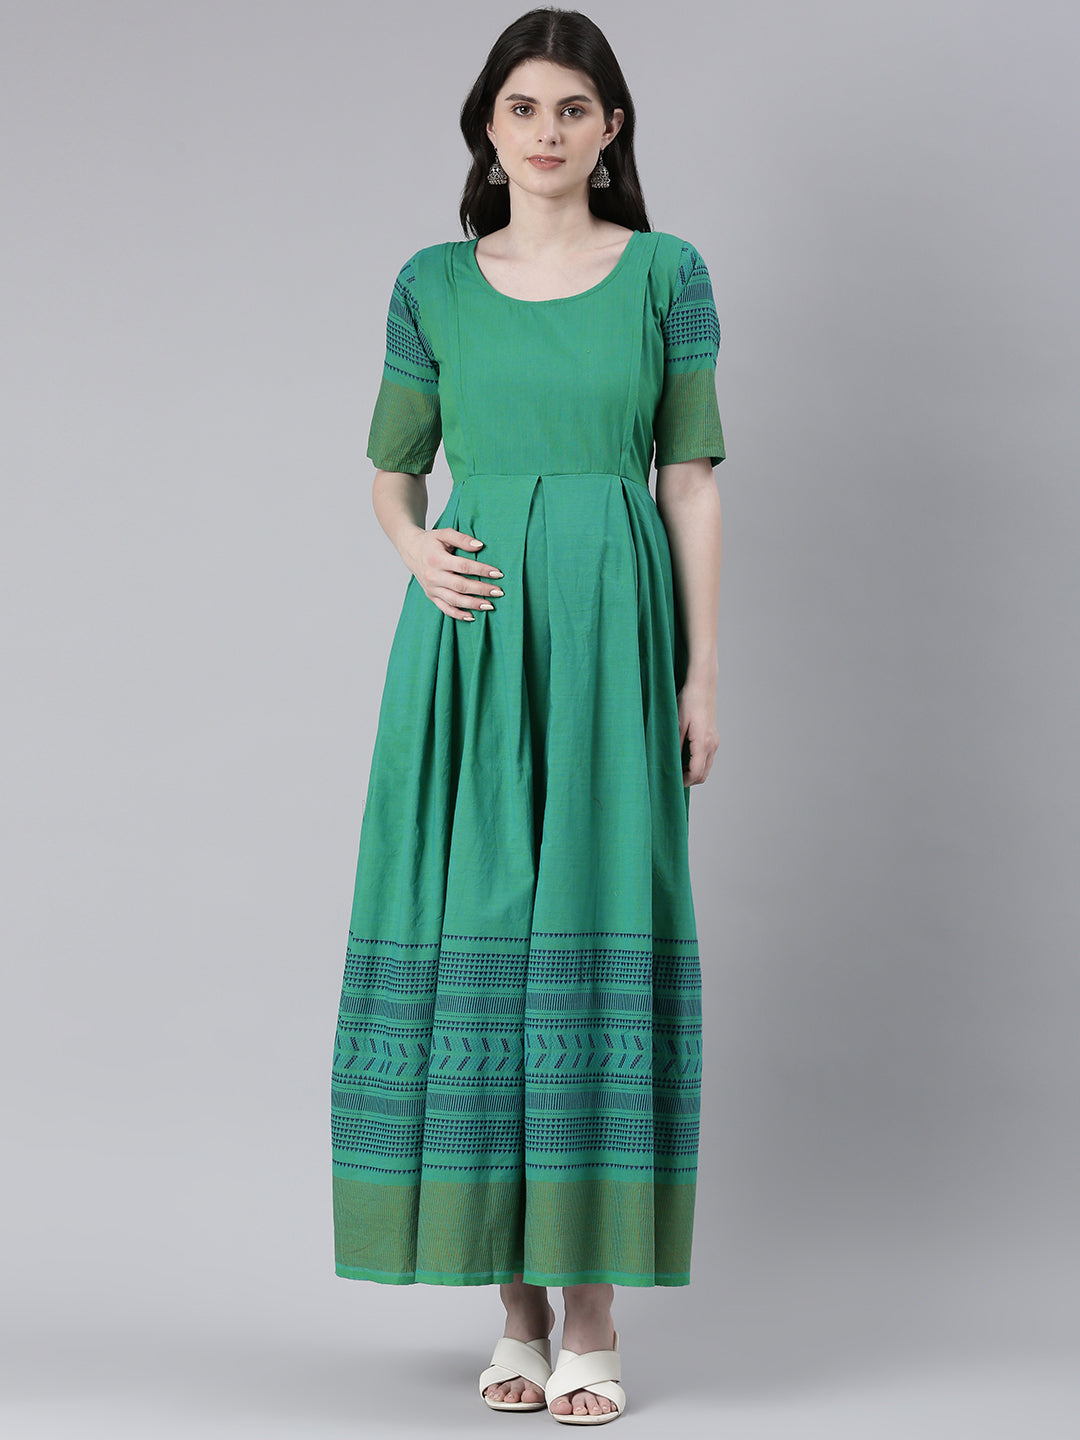 Green and navy blue geometric Checked Maternity Fit & Flare Maxi Ethnic Dress